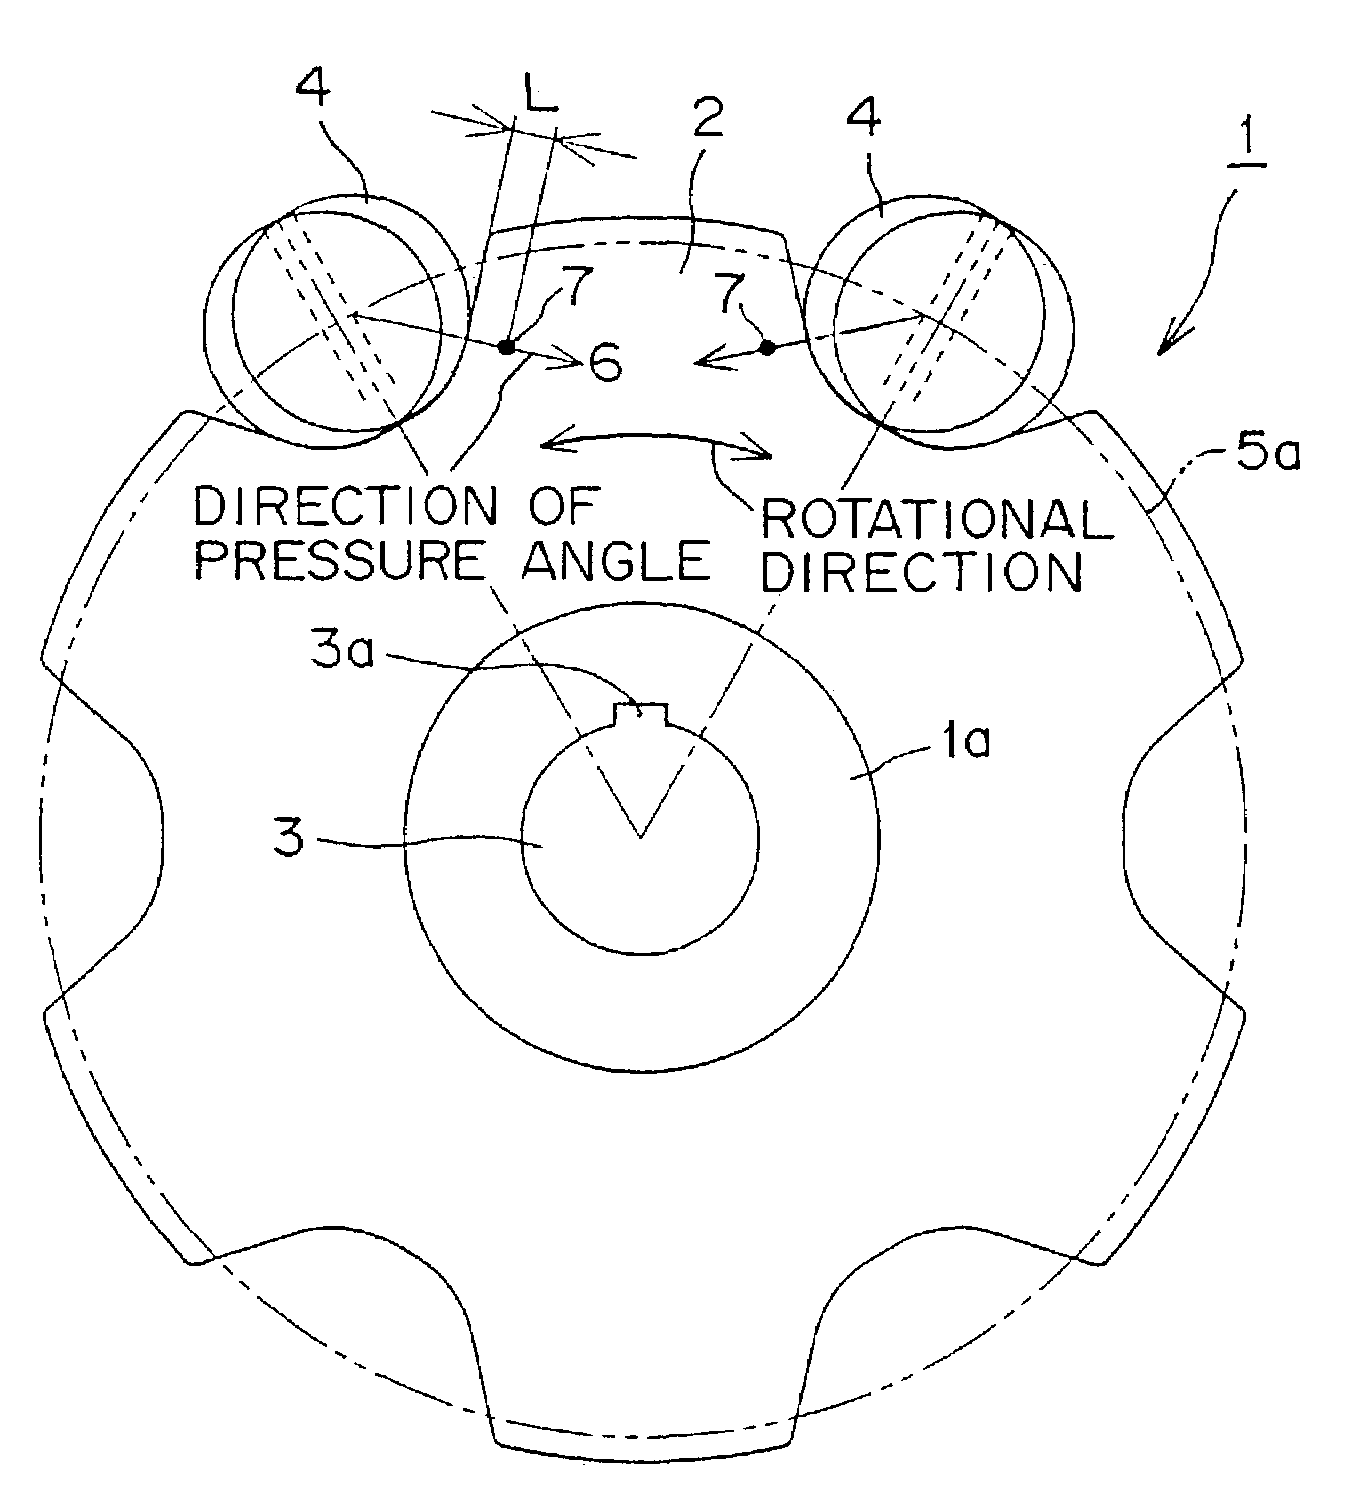 Sprocket with wear limit indication